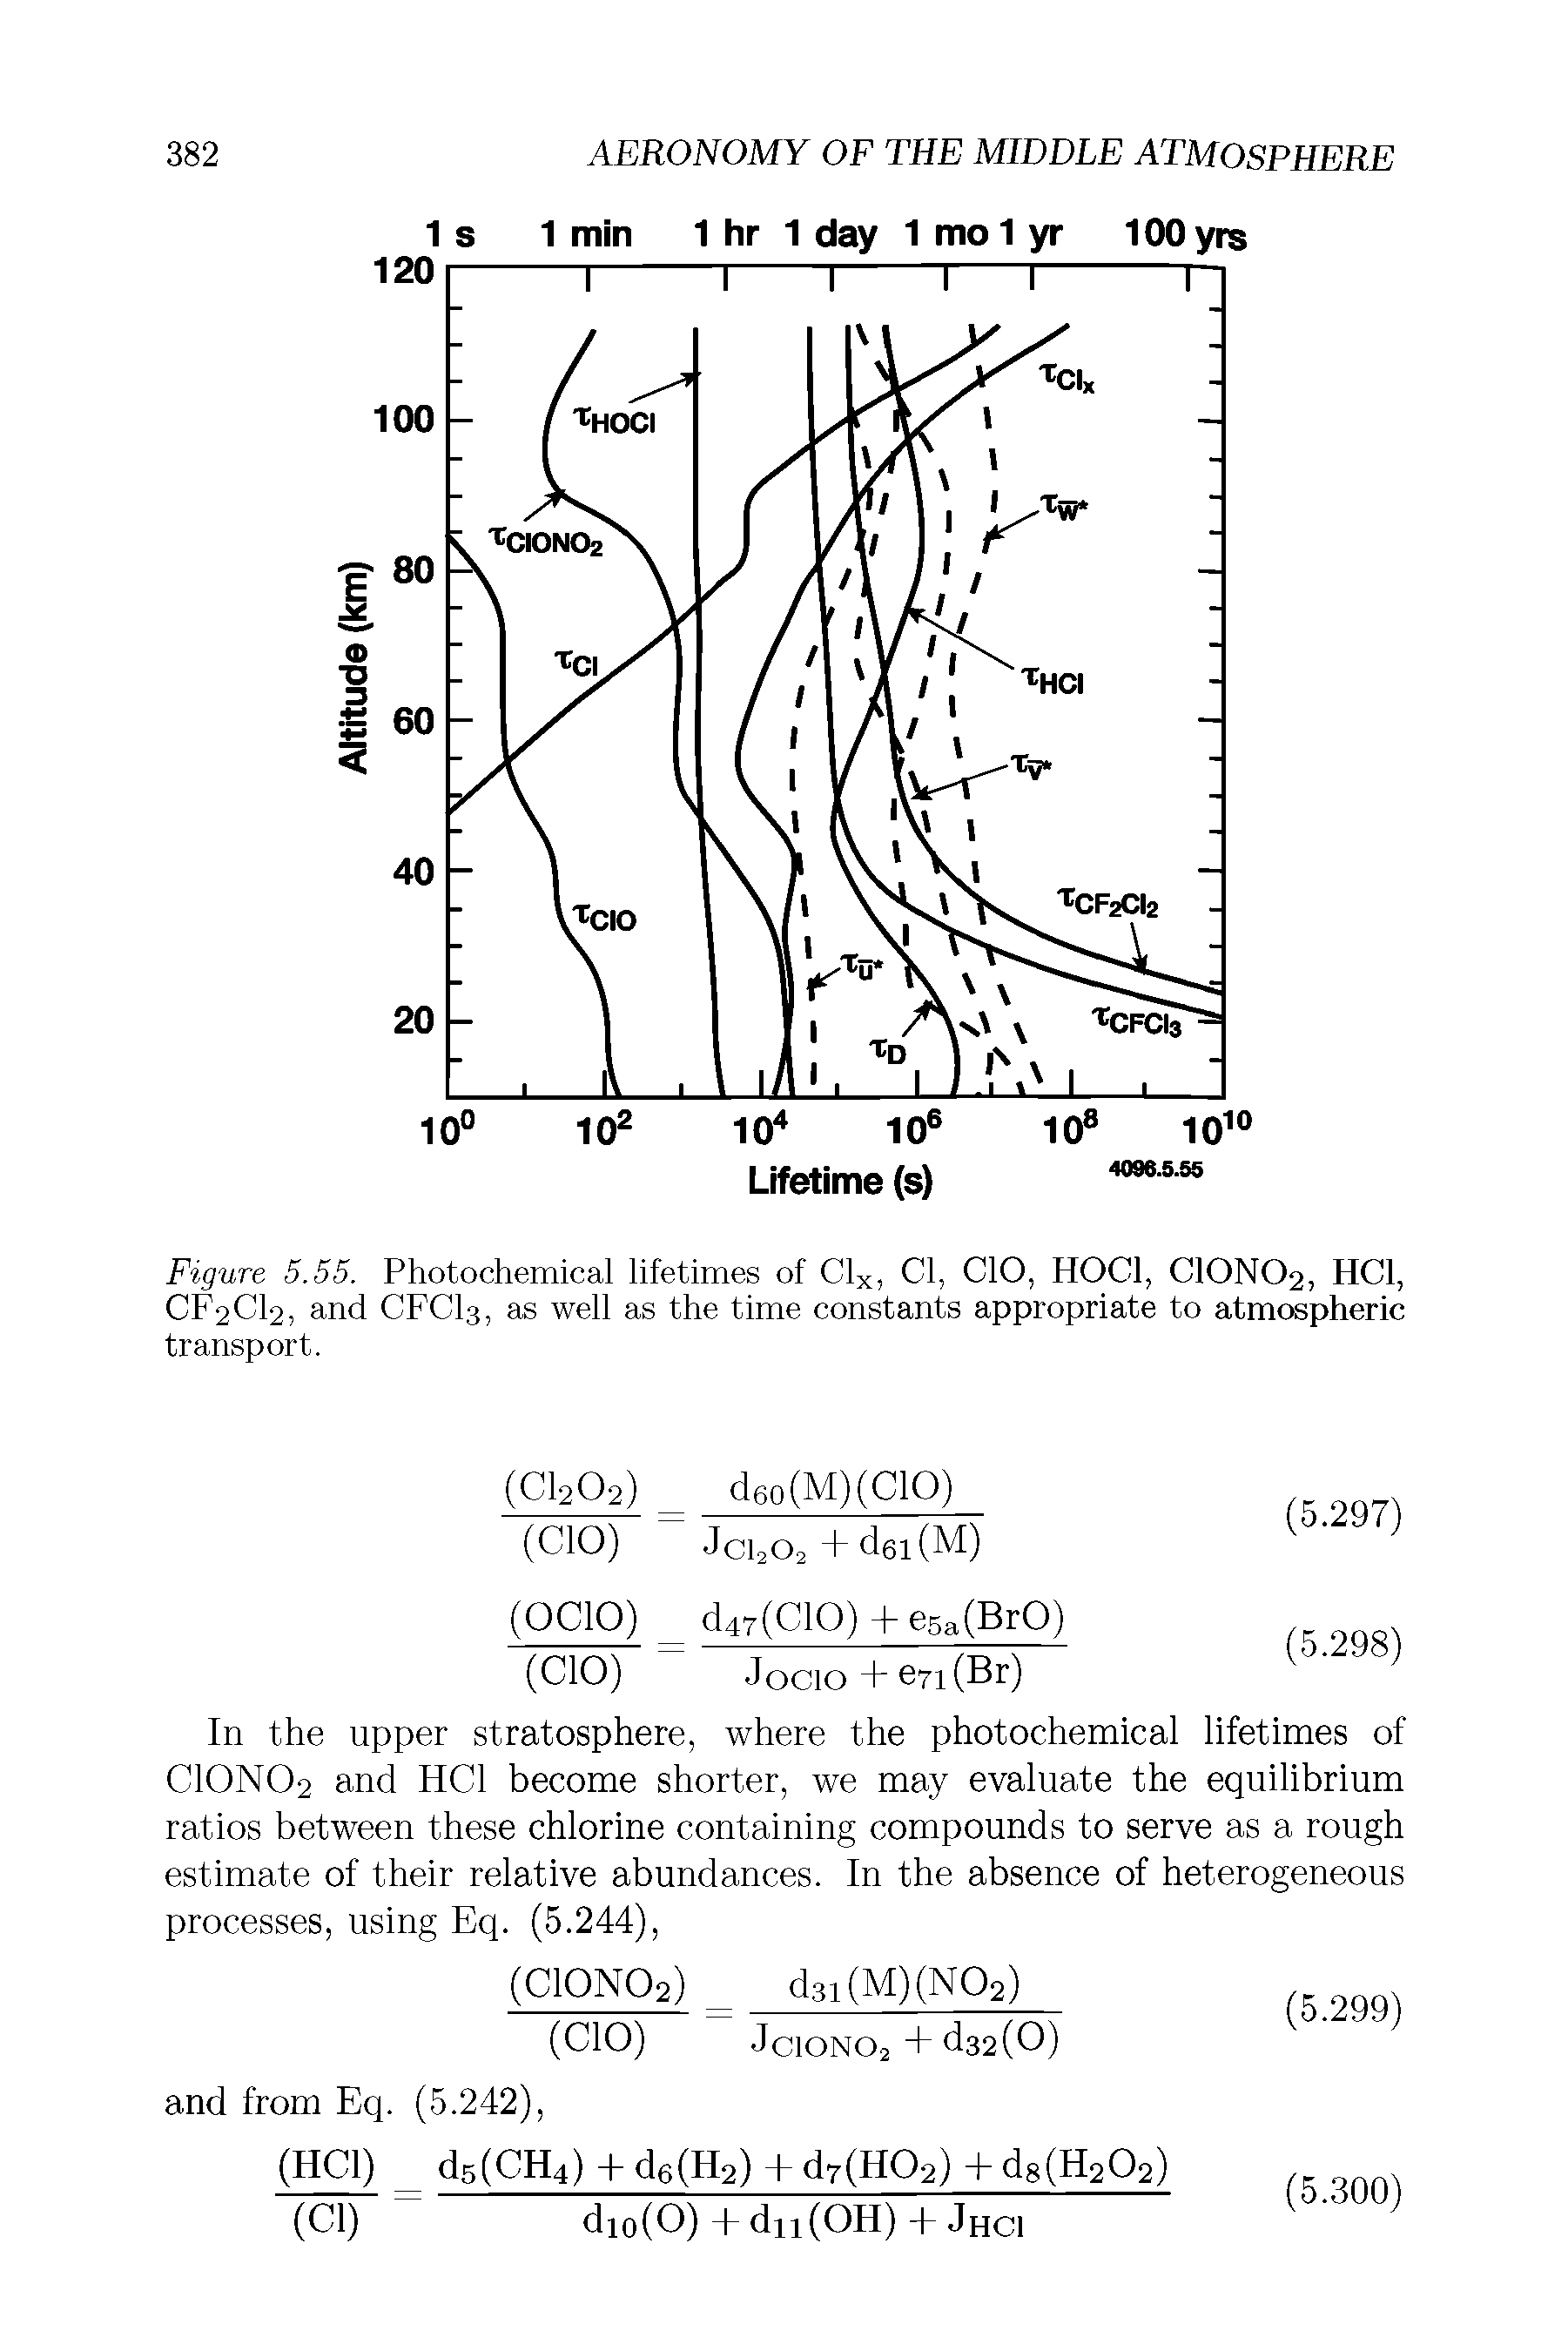 Figure 5.55. Photochemical lifetimes of Clx, Cl, CIO, HOC1, CIONO2, HC1, CF2CI2, and CFCI3, as well as the time constants appropriate to atmospheric transport.